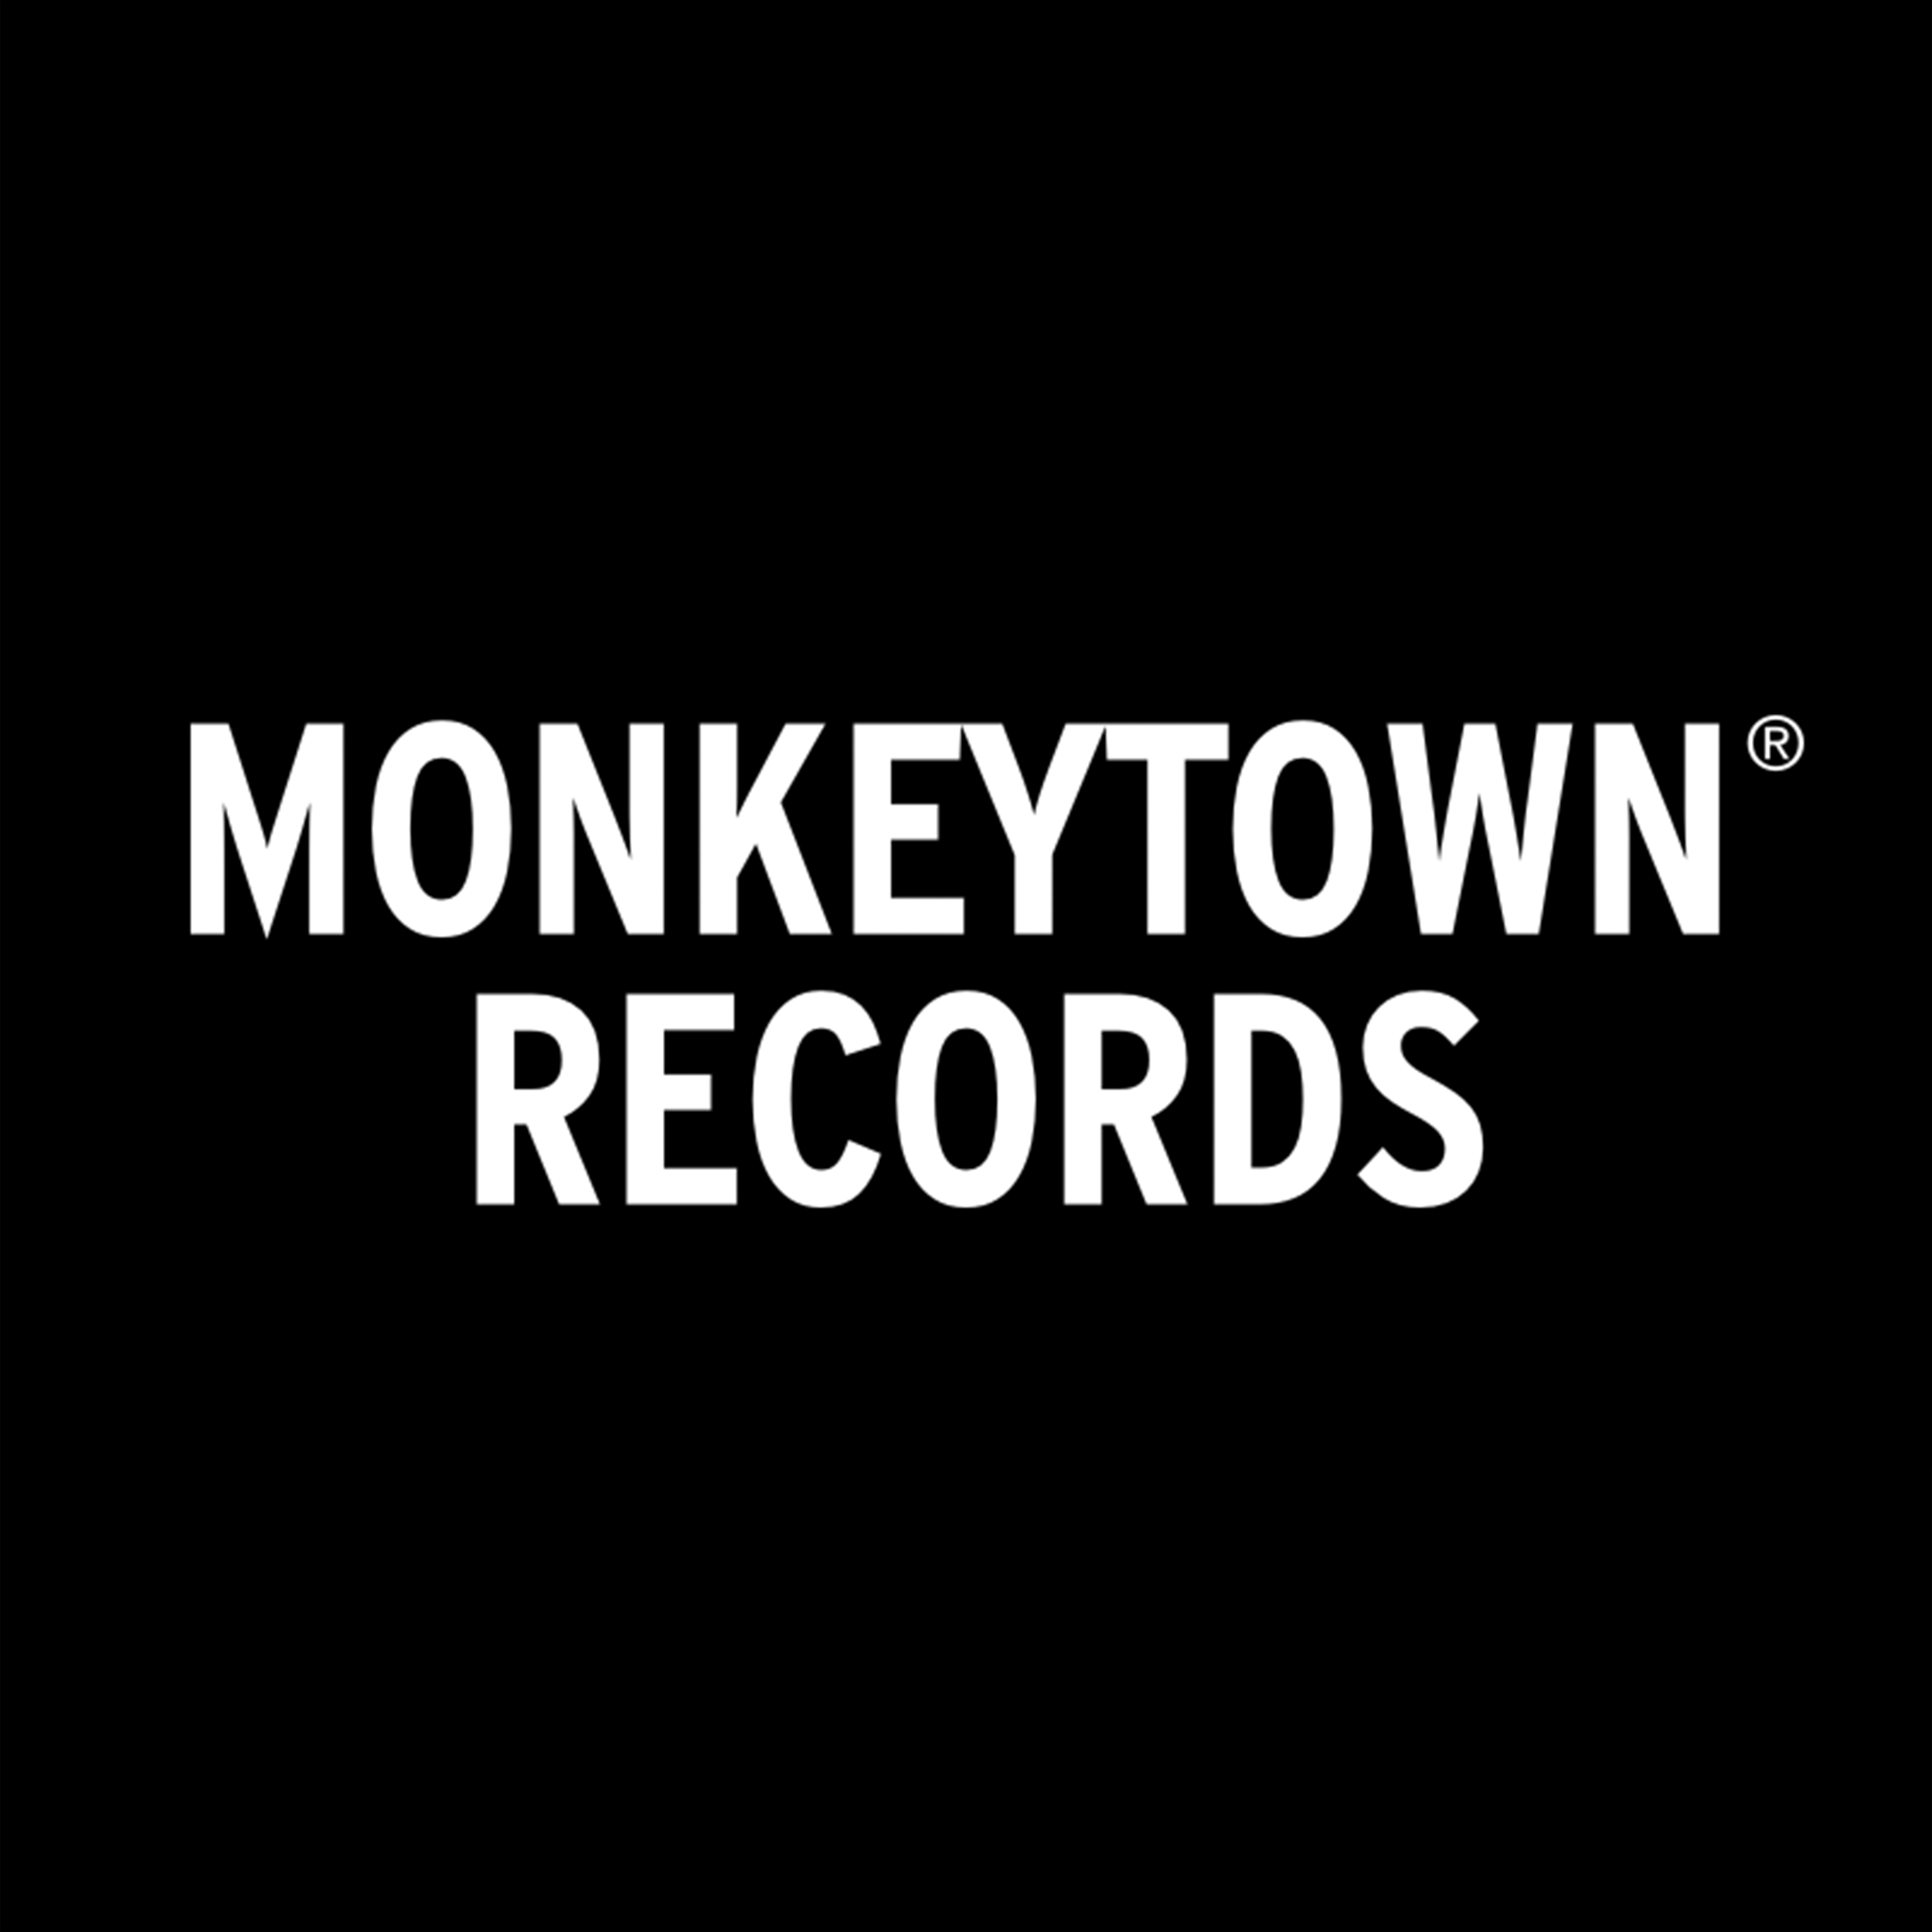 MONKEYTOWN RECORDS